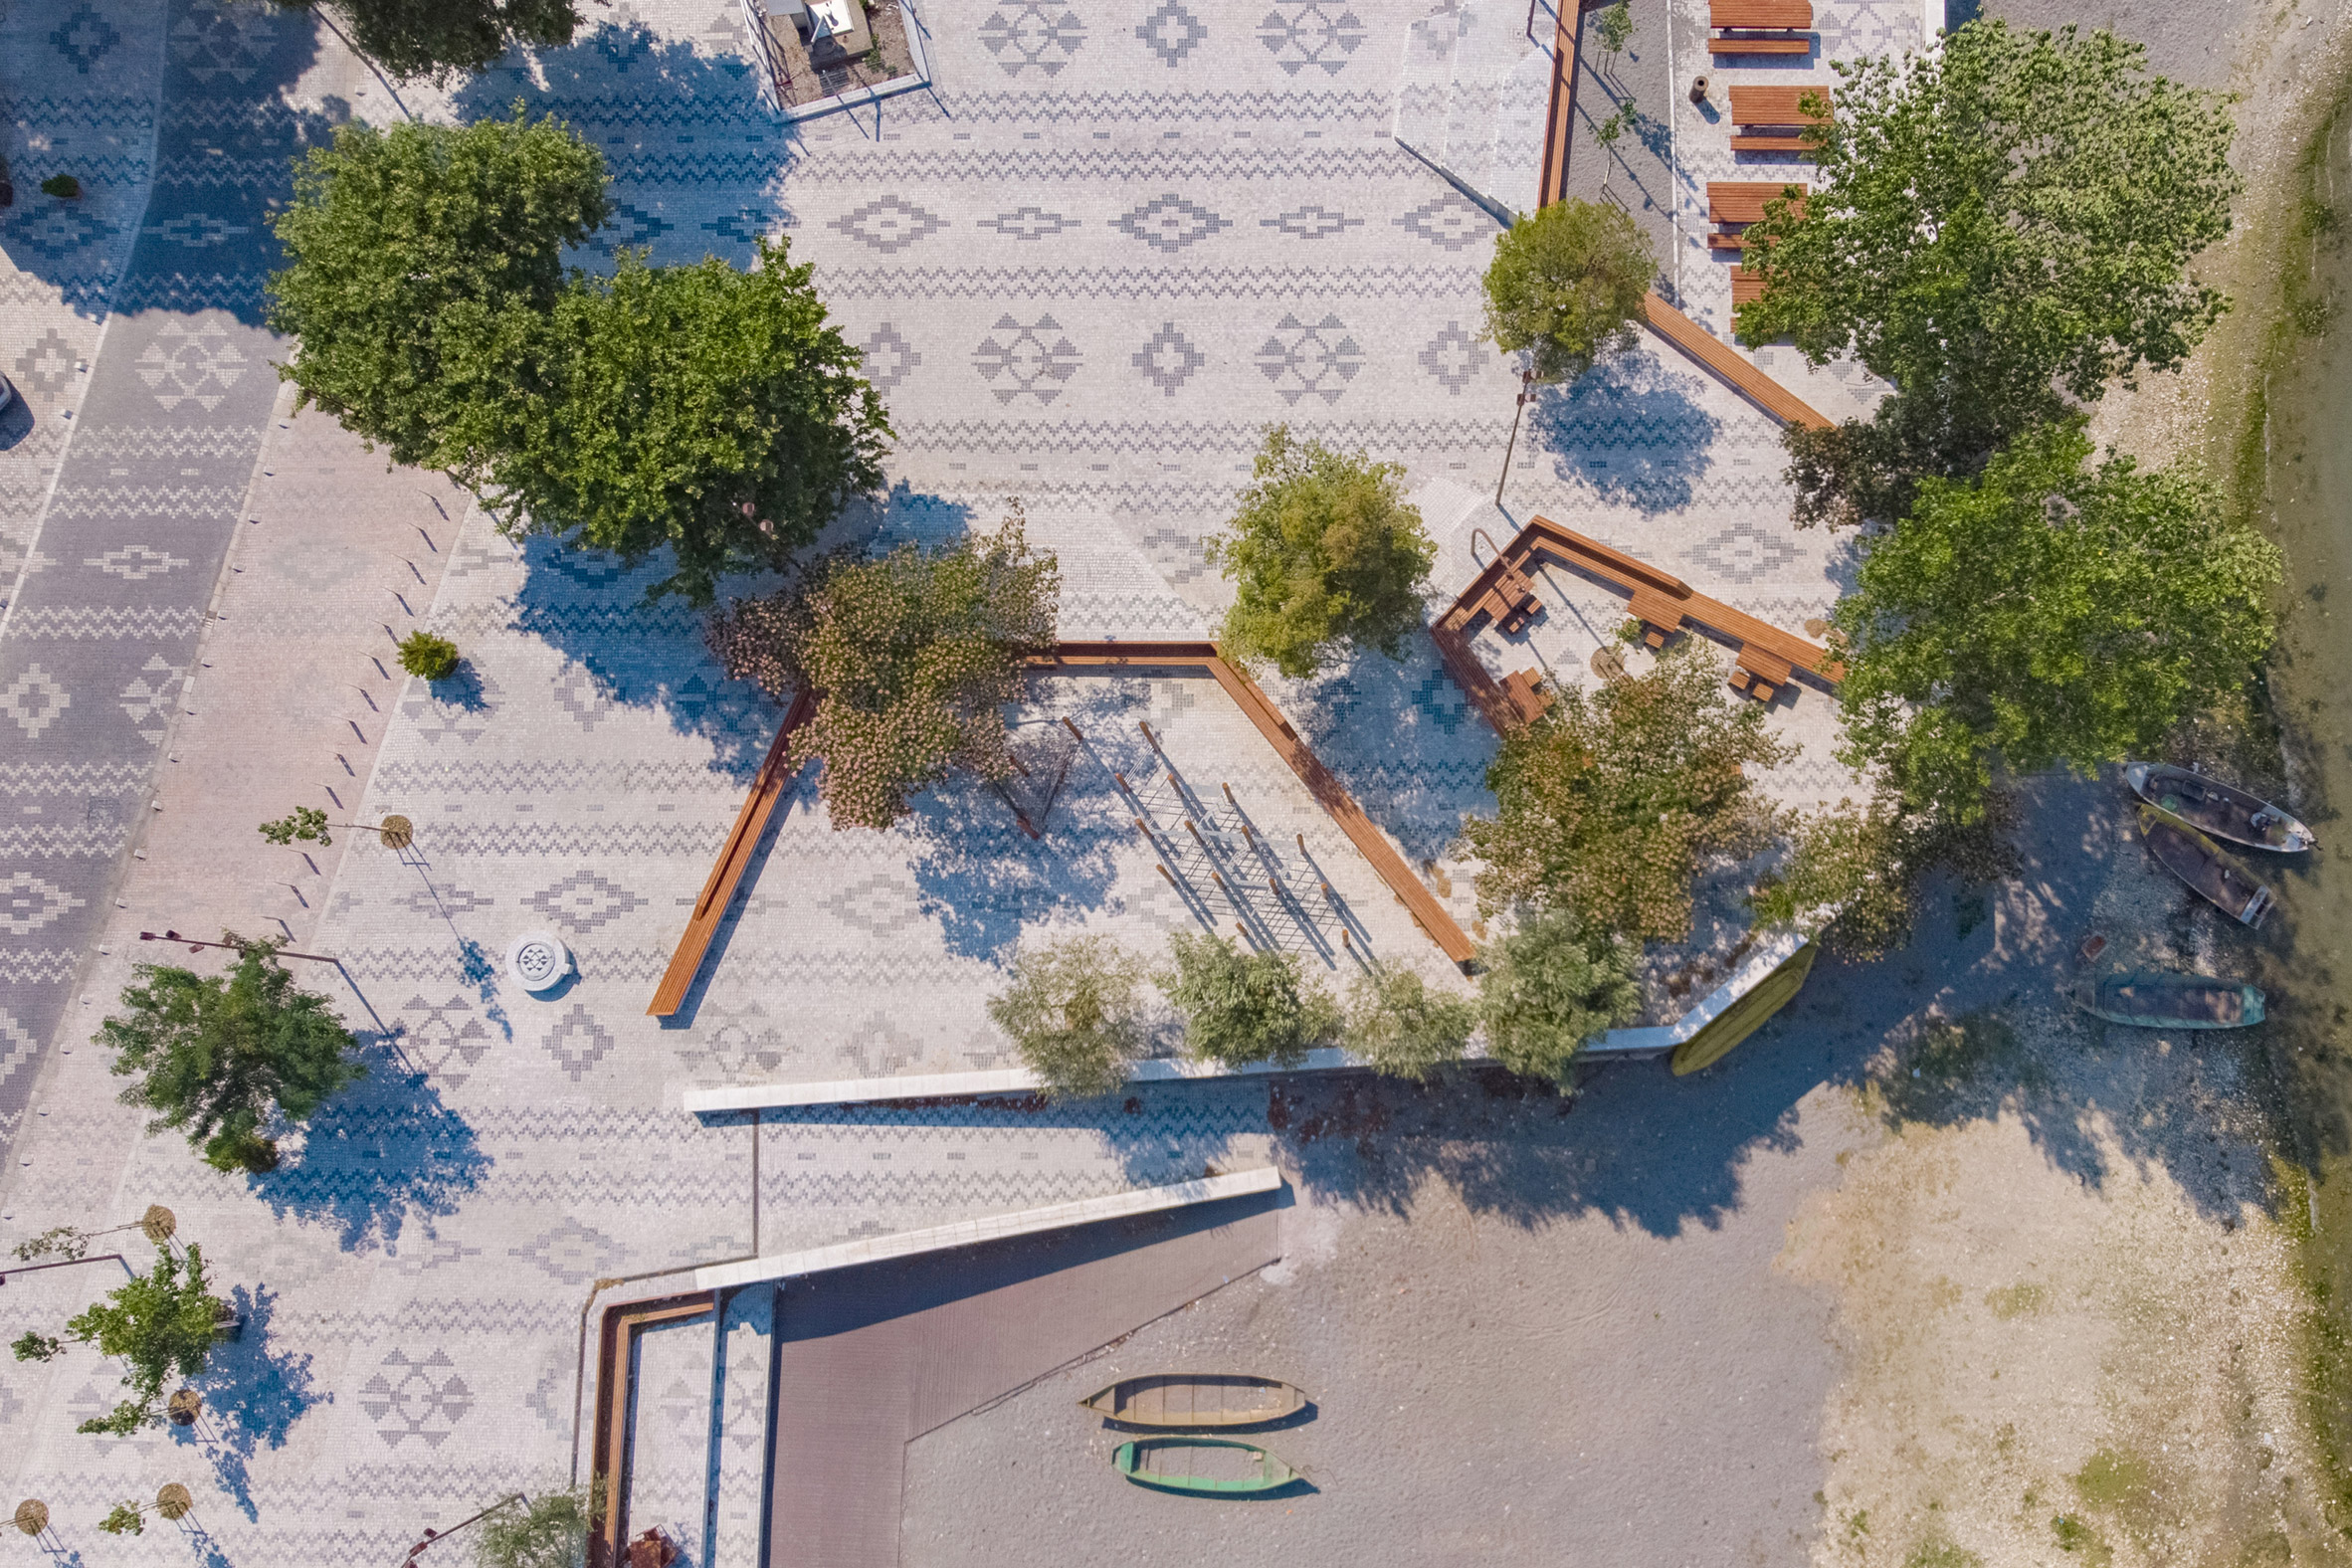 An aerial view of a patterned plaza in Albania